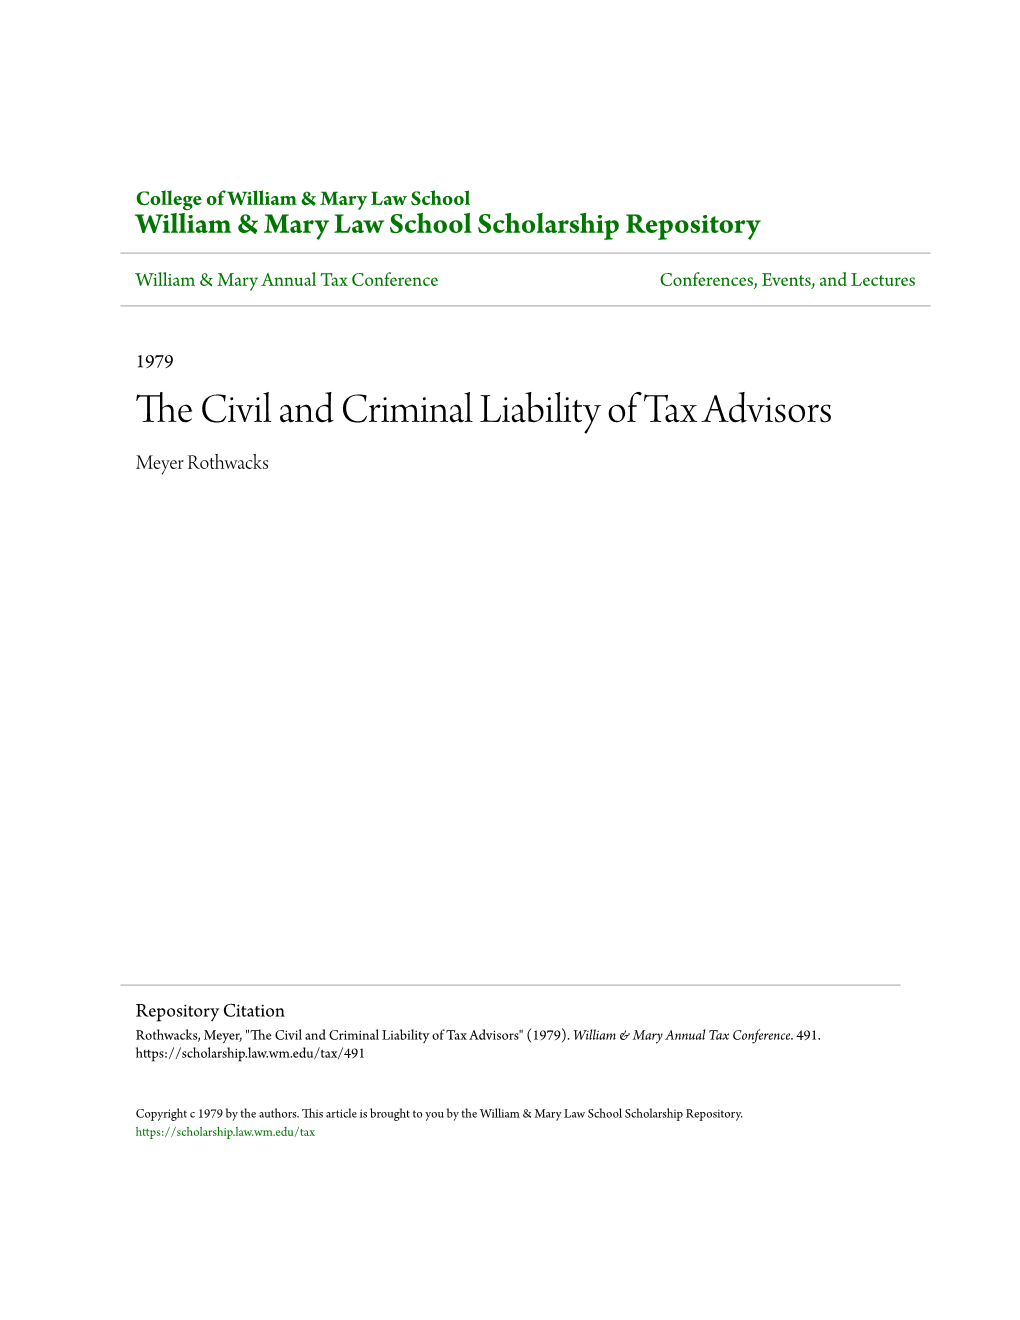 THE CIVIL and CRIMINAL LIABILITY of TAX ADVISORS by MEYER ROTHWACKS